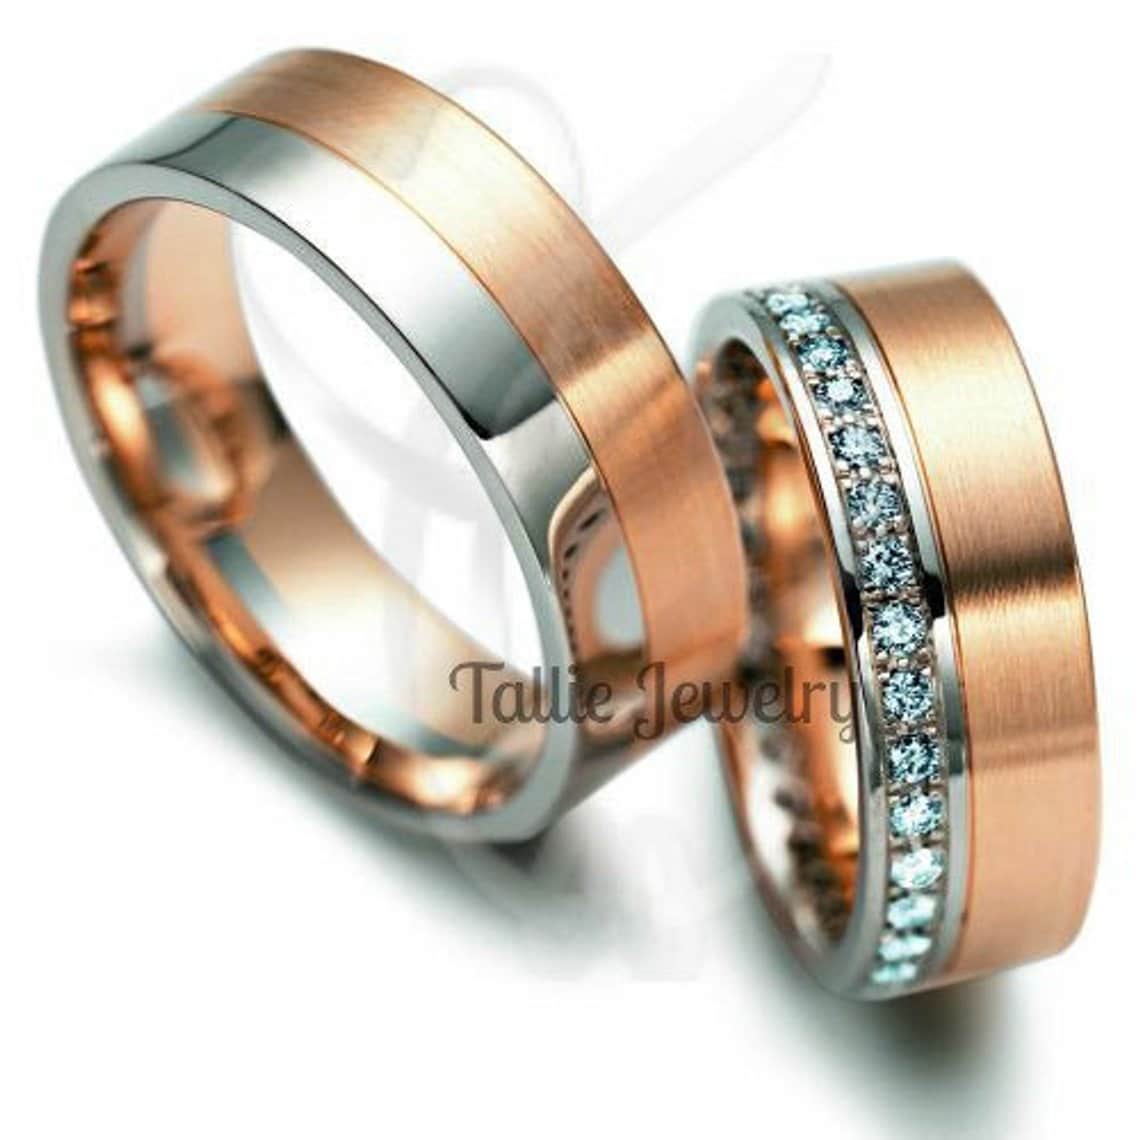 Hers and Hers matching set wedding rings